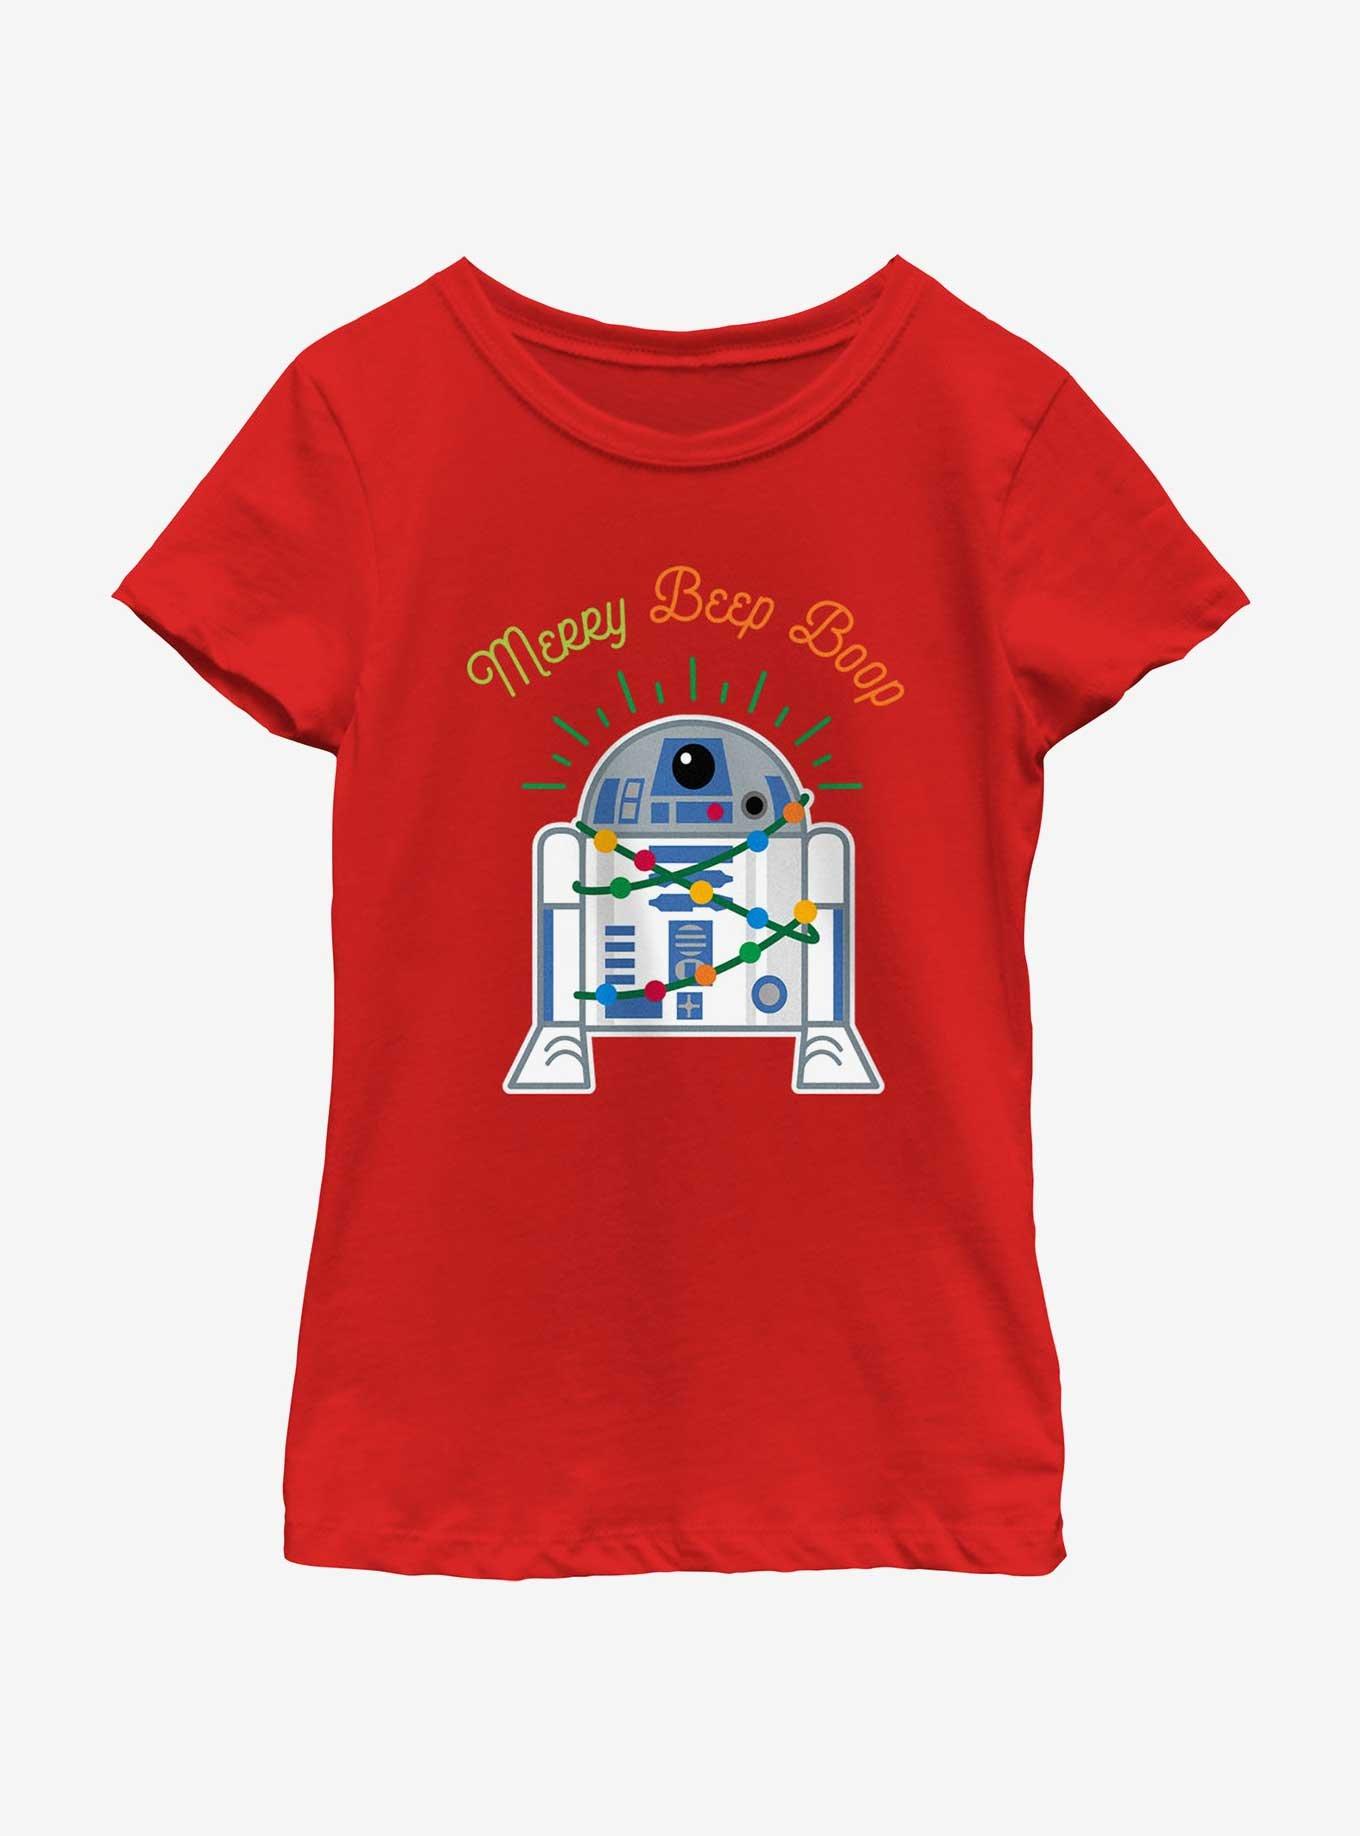 Star Wars R2-D2 Merry Beep Boop Youth Girls T-Shirt, RED, hi-res